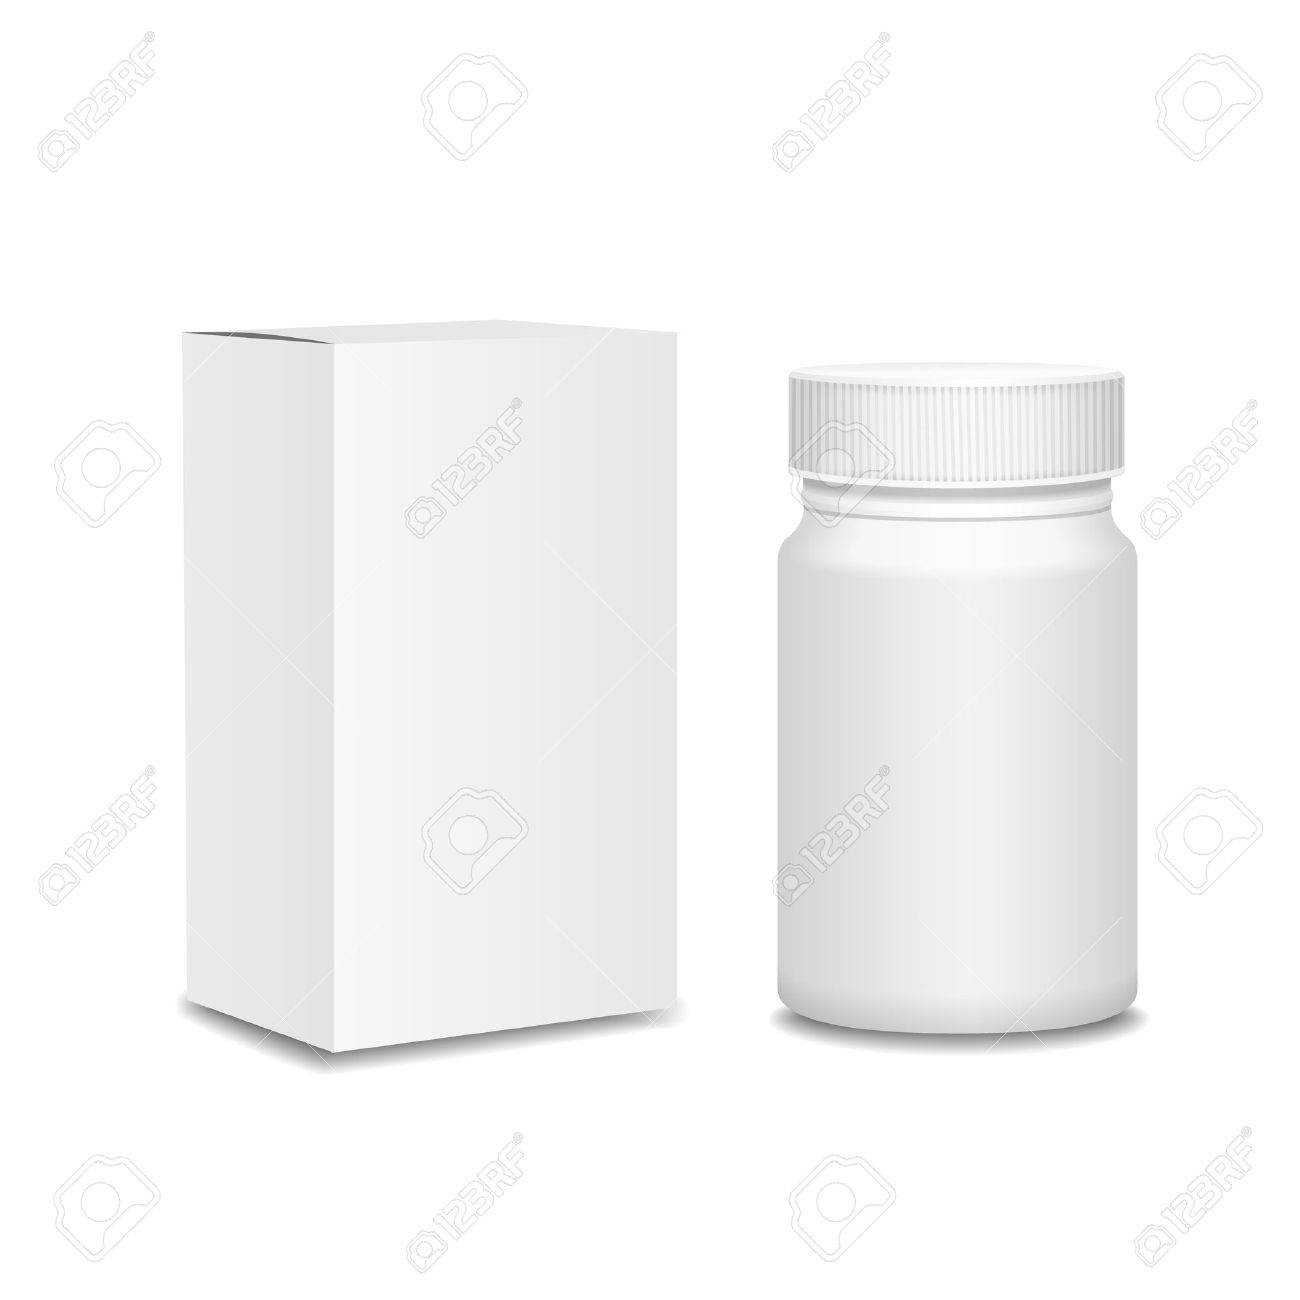 Blank Medicine Bottle And Cardboard Packaging, Vitamins, Examples.. Intended For Blank Packaging Templates